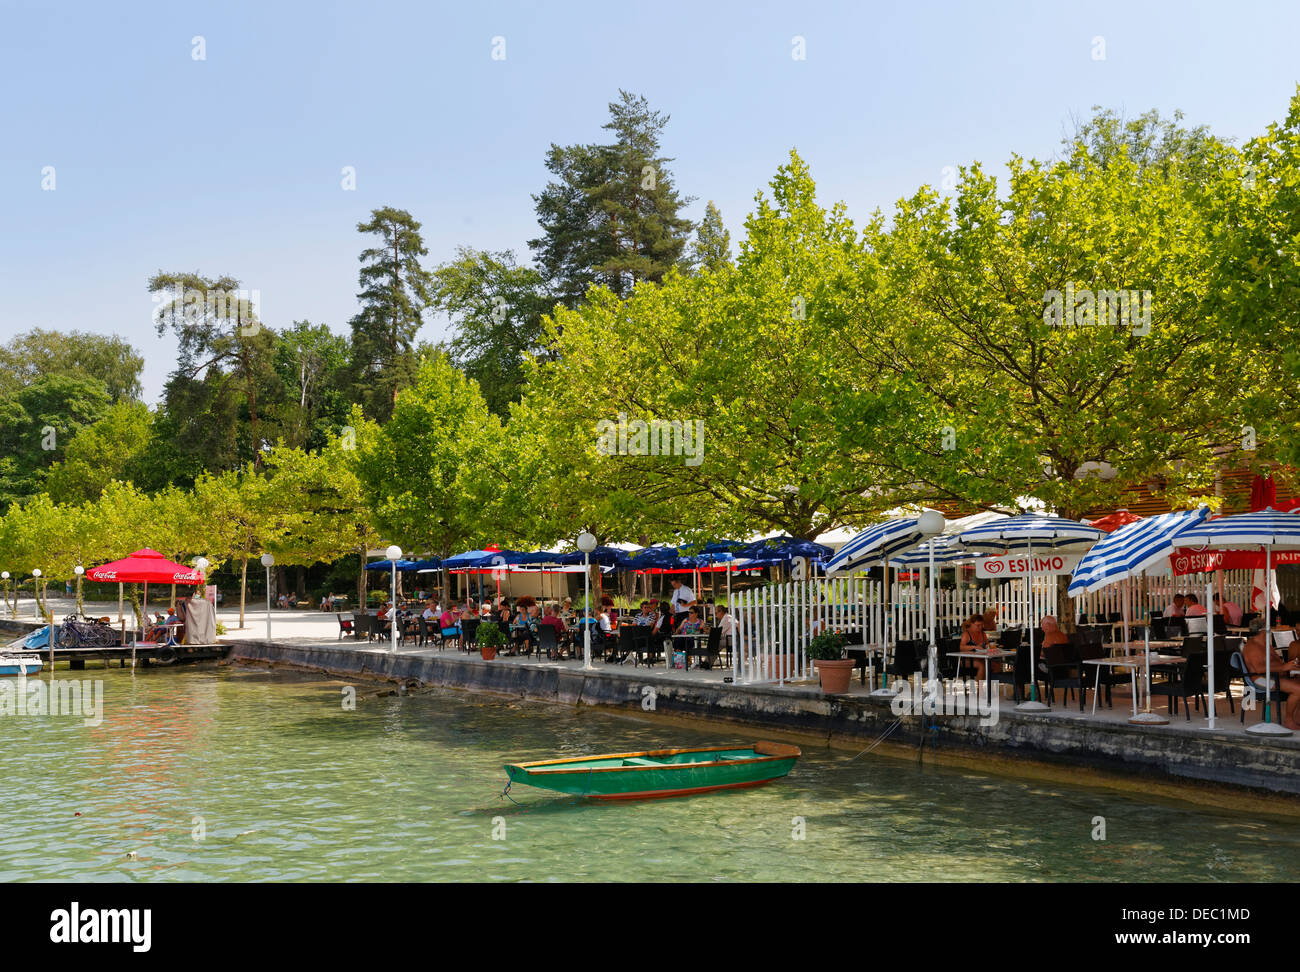 Restaurant on the bathing promenade of Lake Woerthersee, Pörtschach am Wörther See, Carinthia, Austria Stock Photo